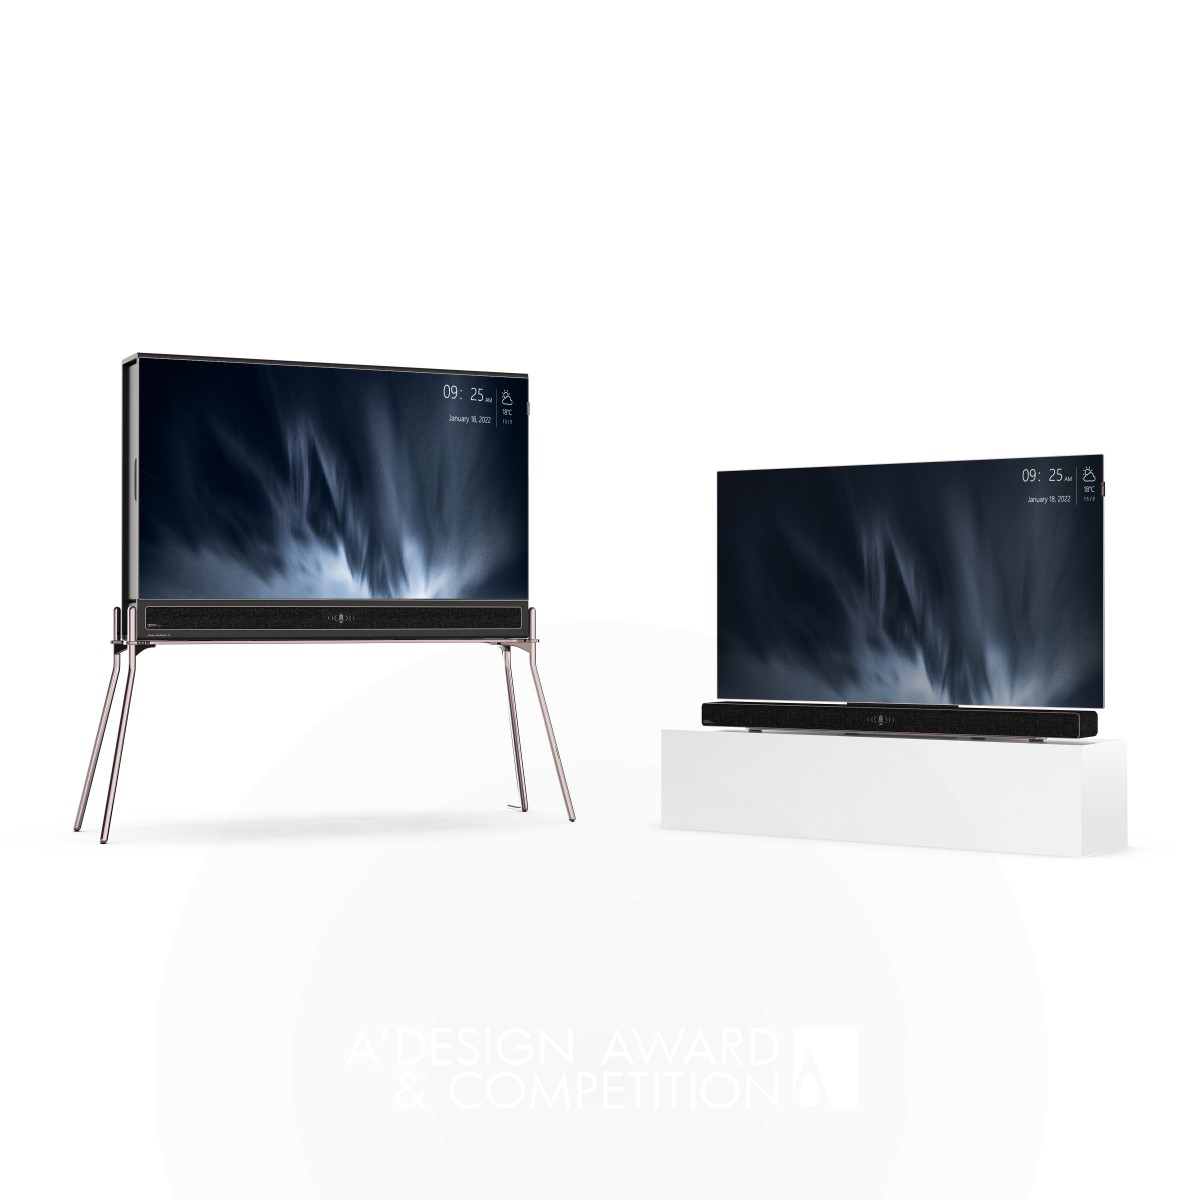 Jiankun SUN wins Iron at the prestigious A' Digital and Electronic Device Design Award with Aesthetic Series Multifunctional OLED TV.